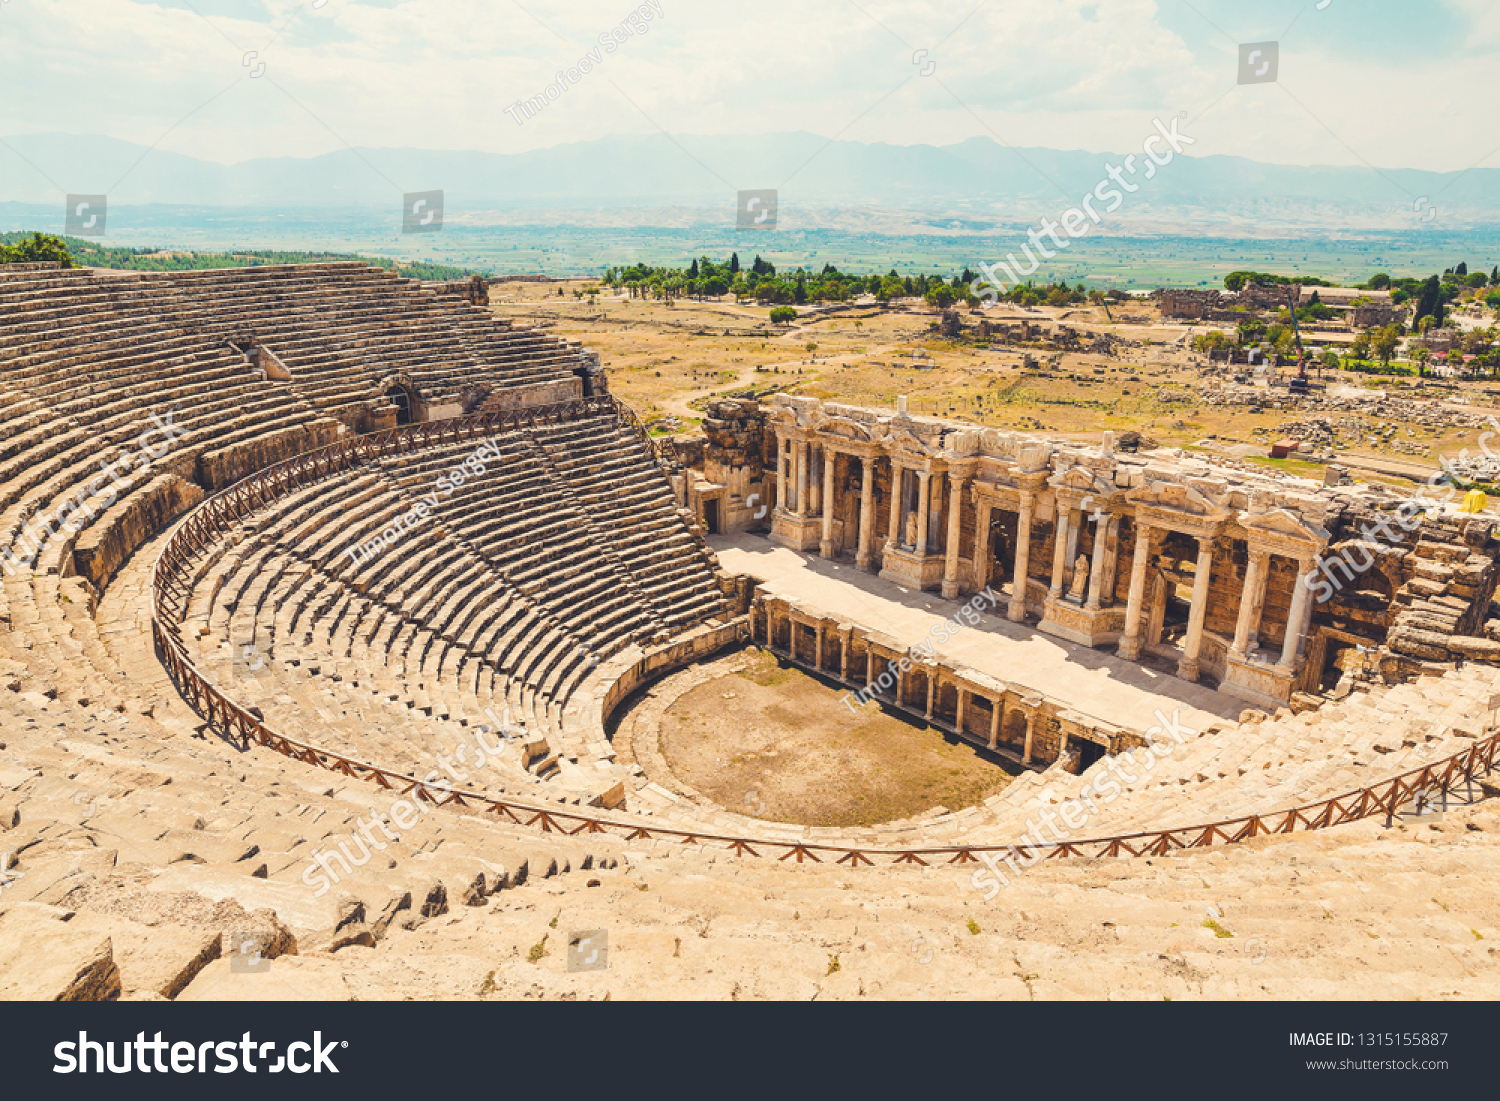 Panorama ancient Greco Roman city. Ruins of ancient city of old amphitheater, Hierapolis in Pamukkale, Turkey. Ruined ancient city in Europe. Is popular tourist destination in Turkey #1315155887